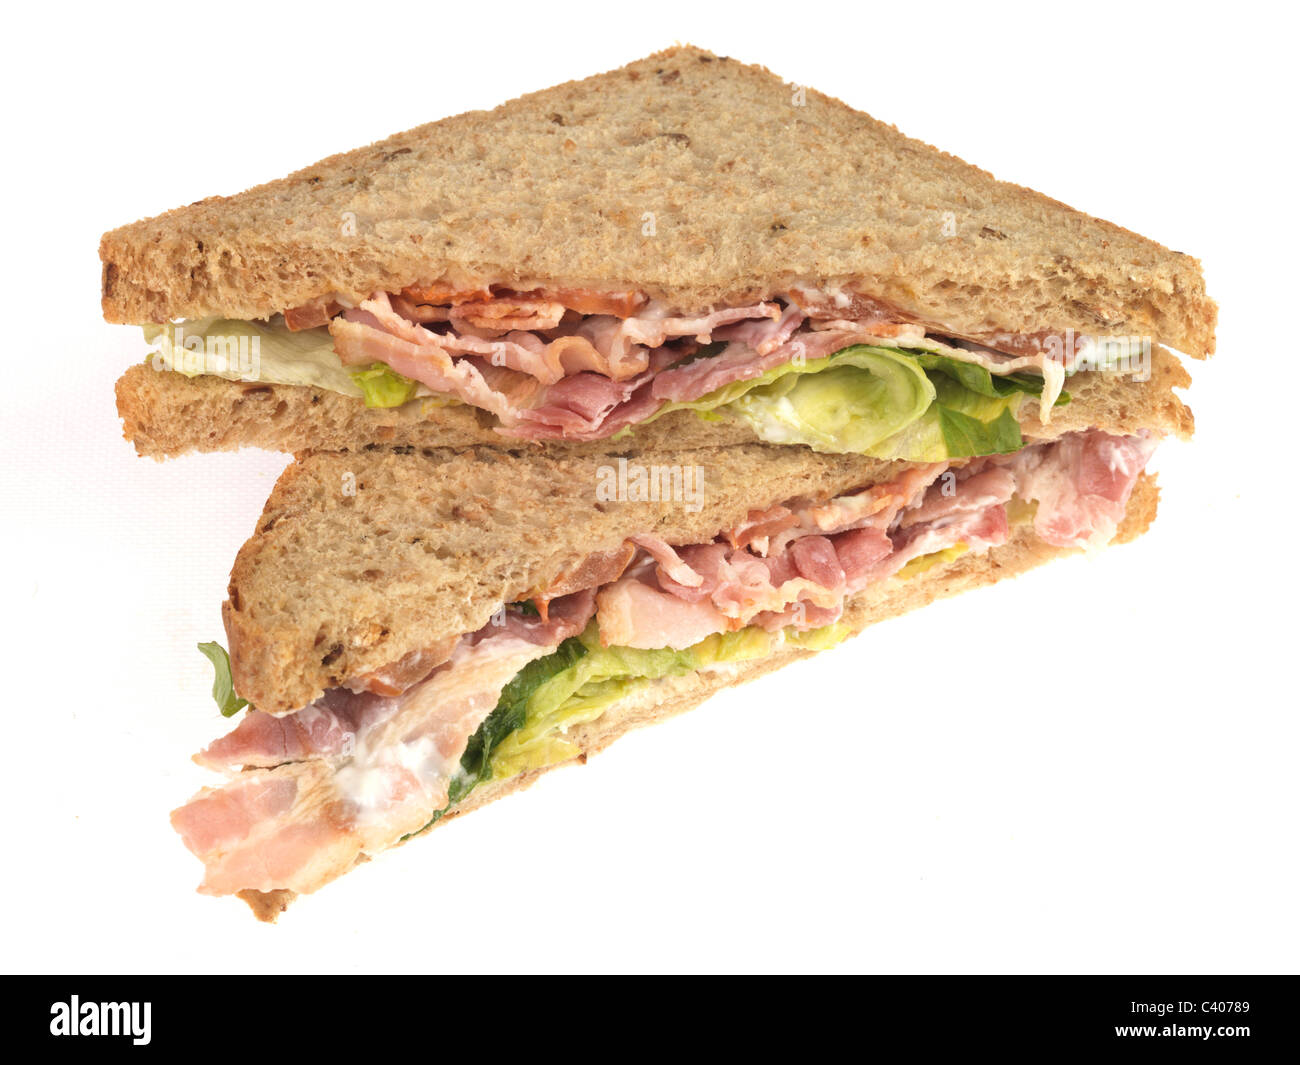 Freshly Prepared Bacon Lettuce And Tomato BLT Sandwich On Wholegrain Brown Bread Isolated Against A White Background With No People Stock Photo